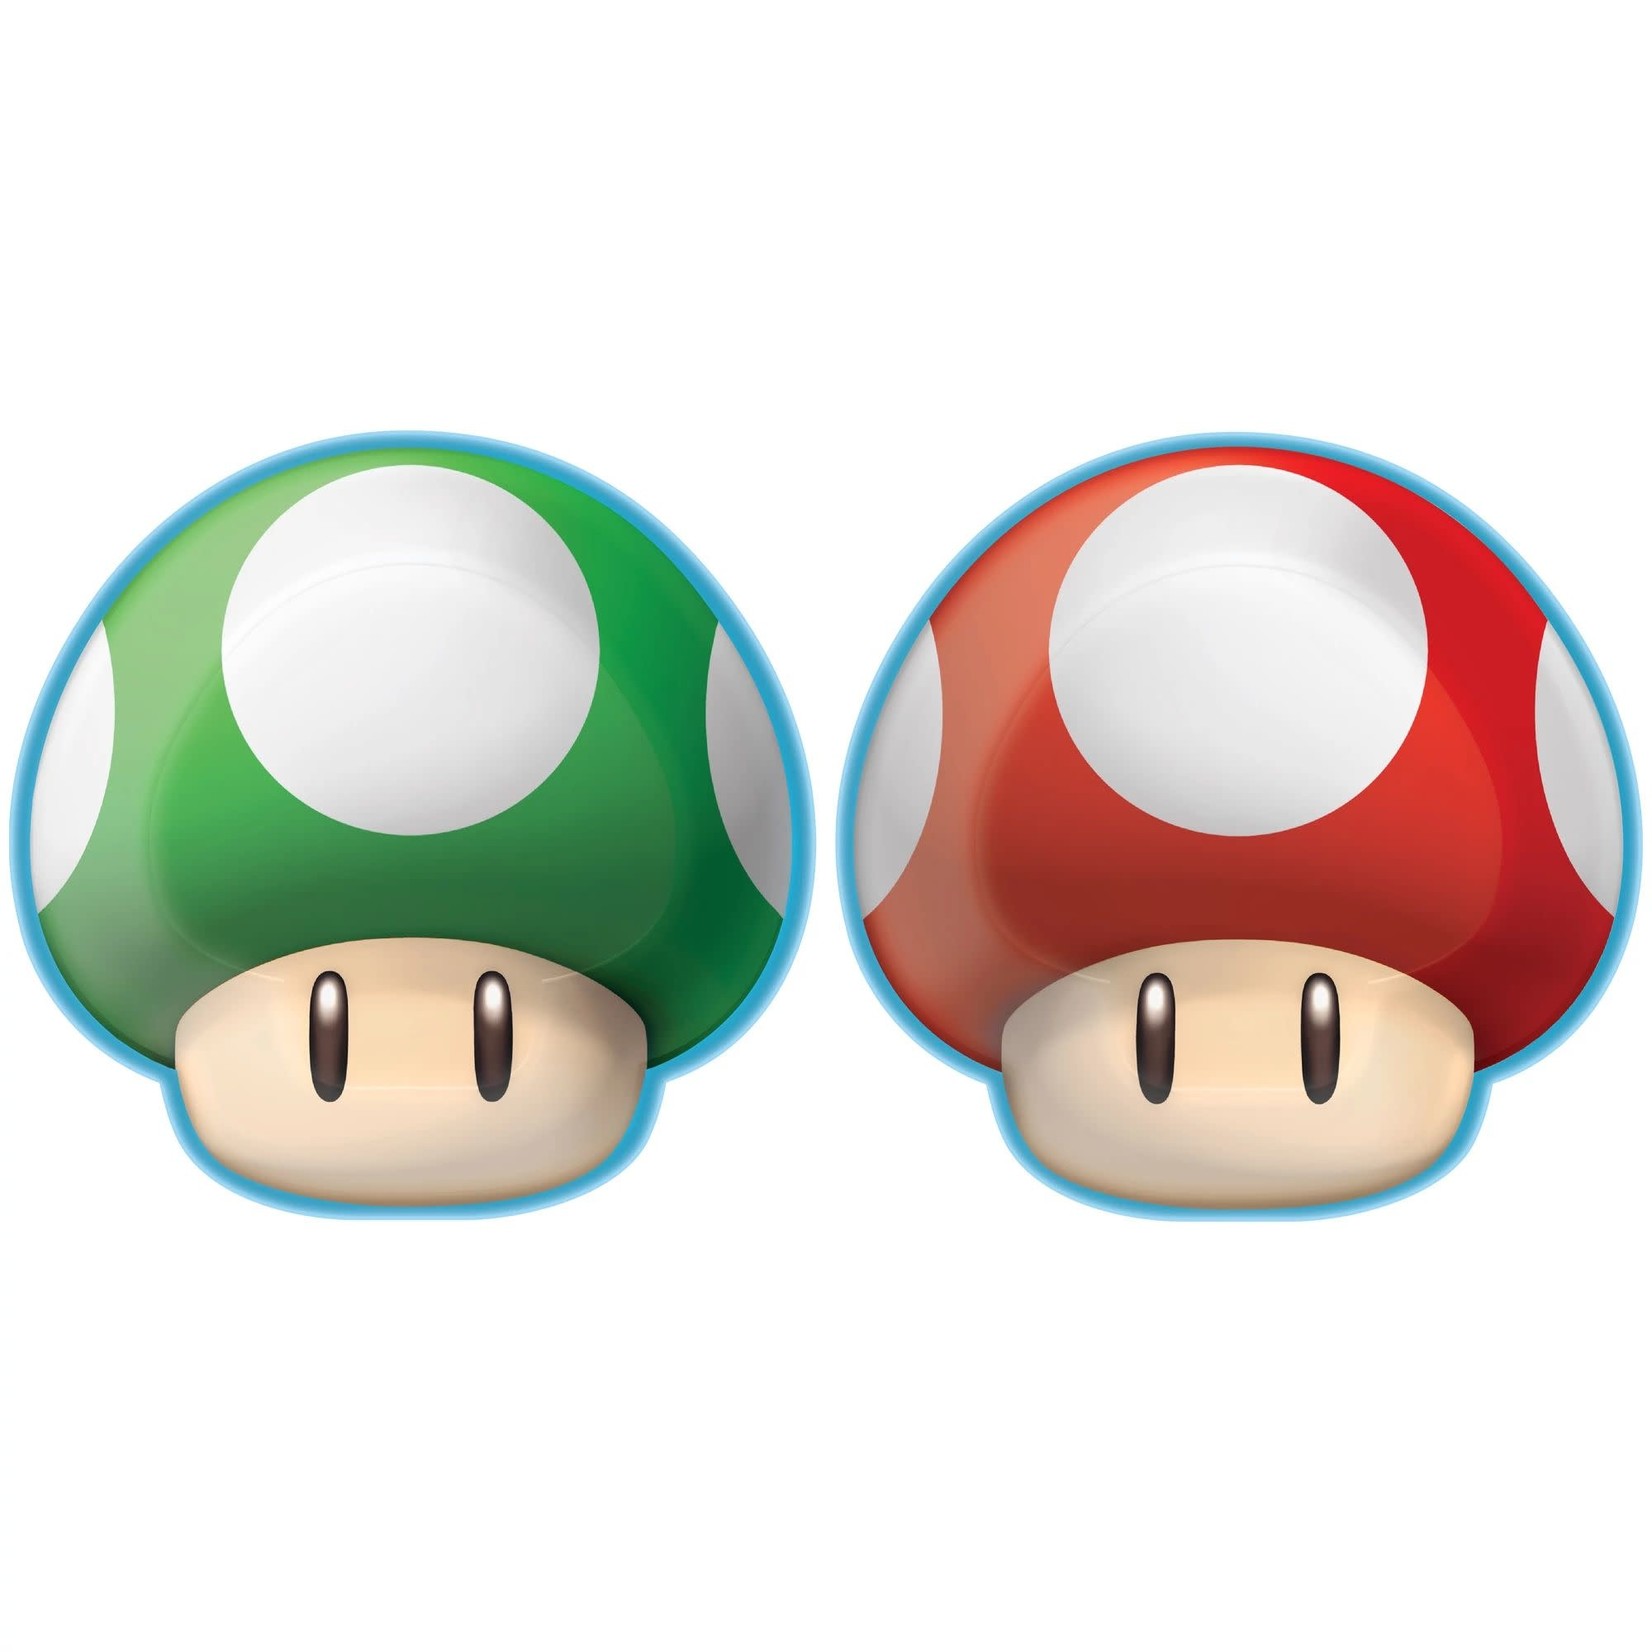 Super Mario Brothers 7" Shaped Plates